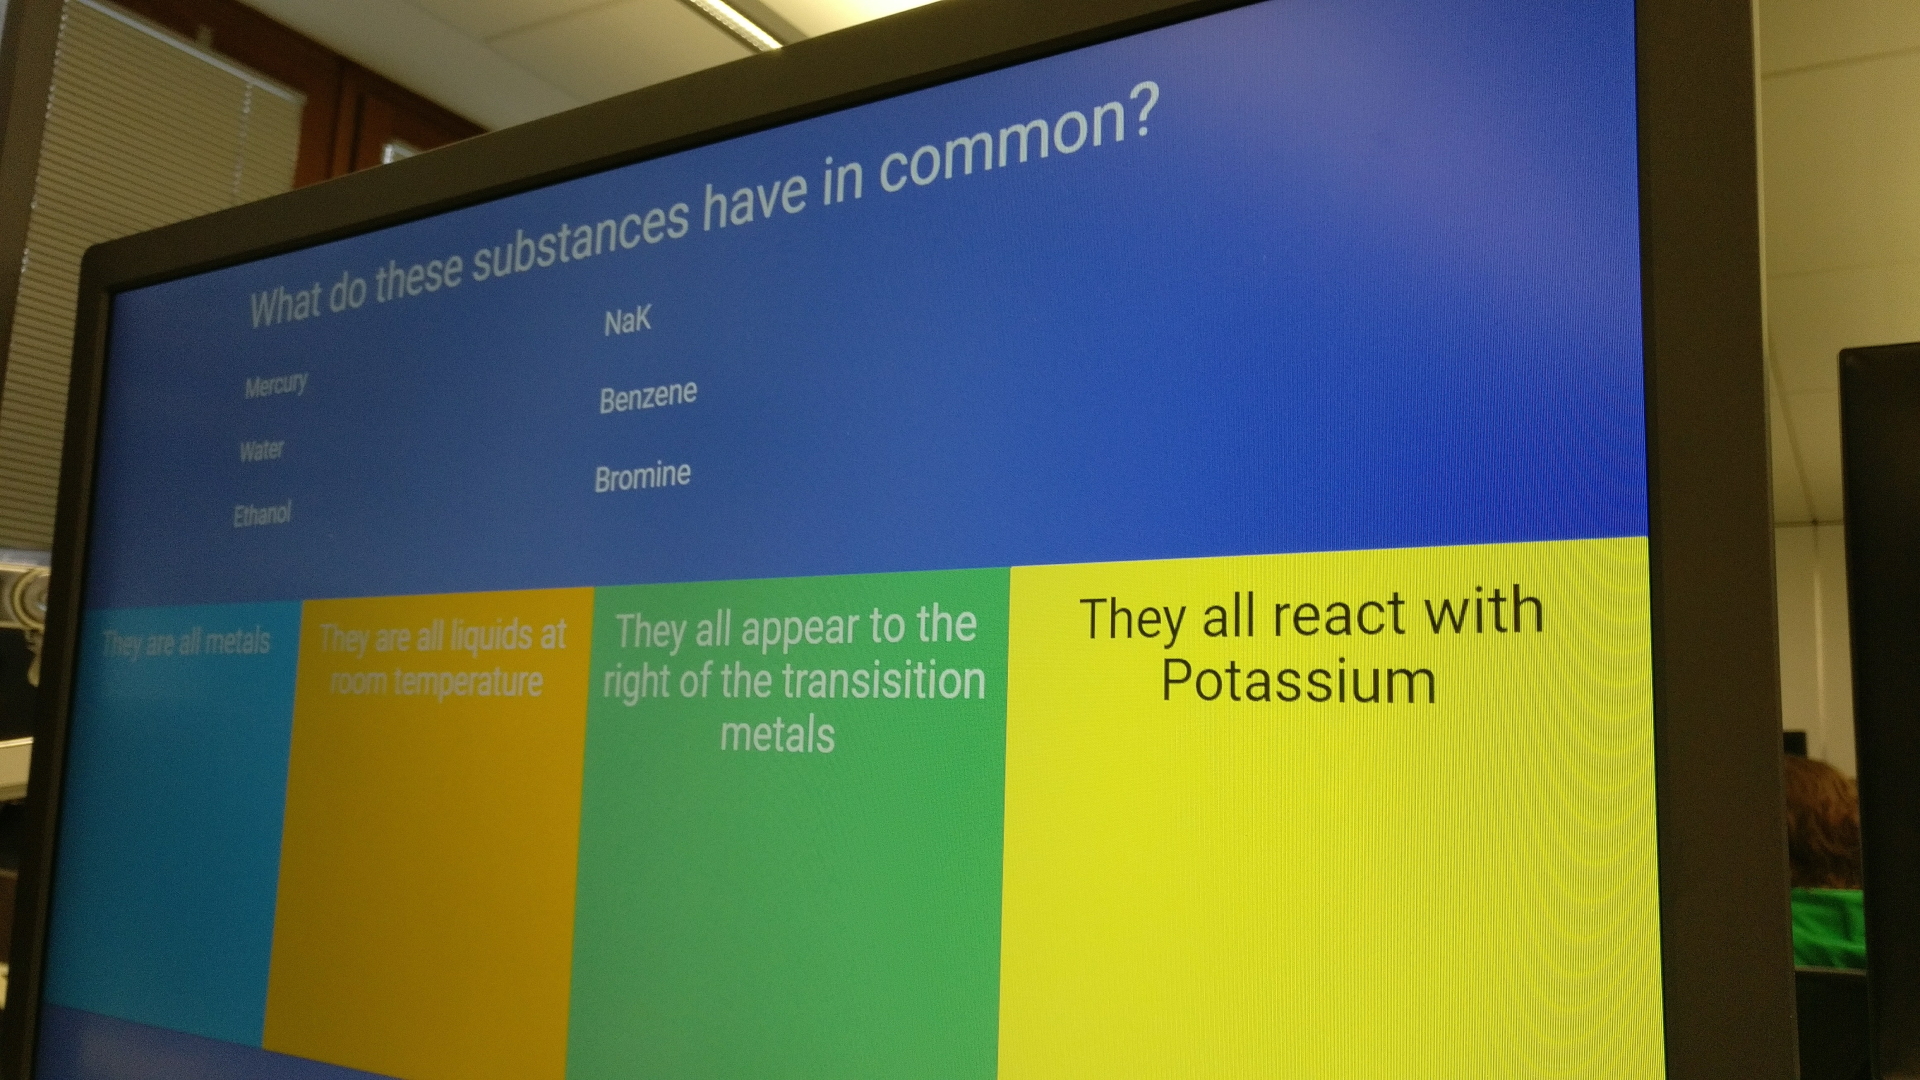 A photograph of a computer monitor. On the screen a question can be seen, reading "What do these substances have in common? Mercury, Water, Ethanol, NaK, Benzene, Bromine." At the bottom of the screen are four answers, each with a different coloured background. They read "They are all metals", "They are all liquids at room temperature", "They all appear to the right of the transition metals", and "They all react with Potassium".